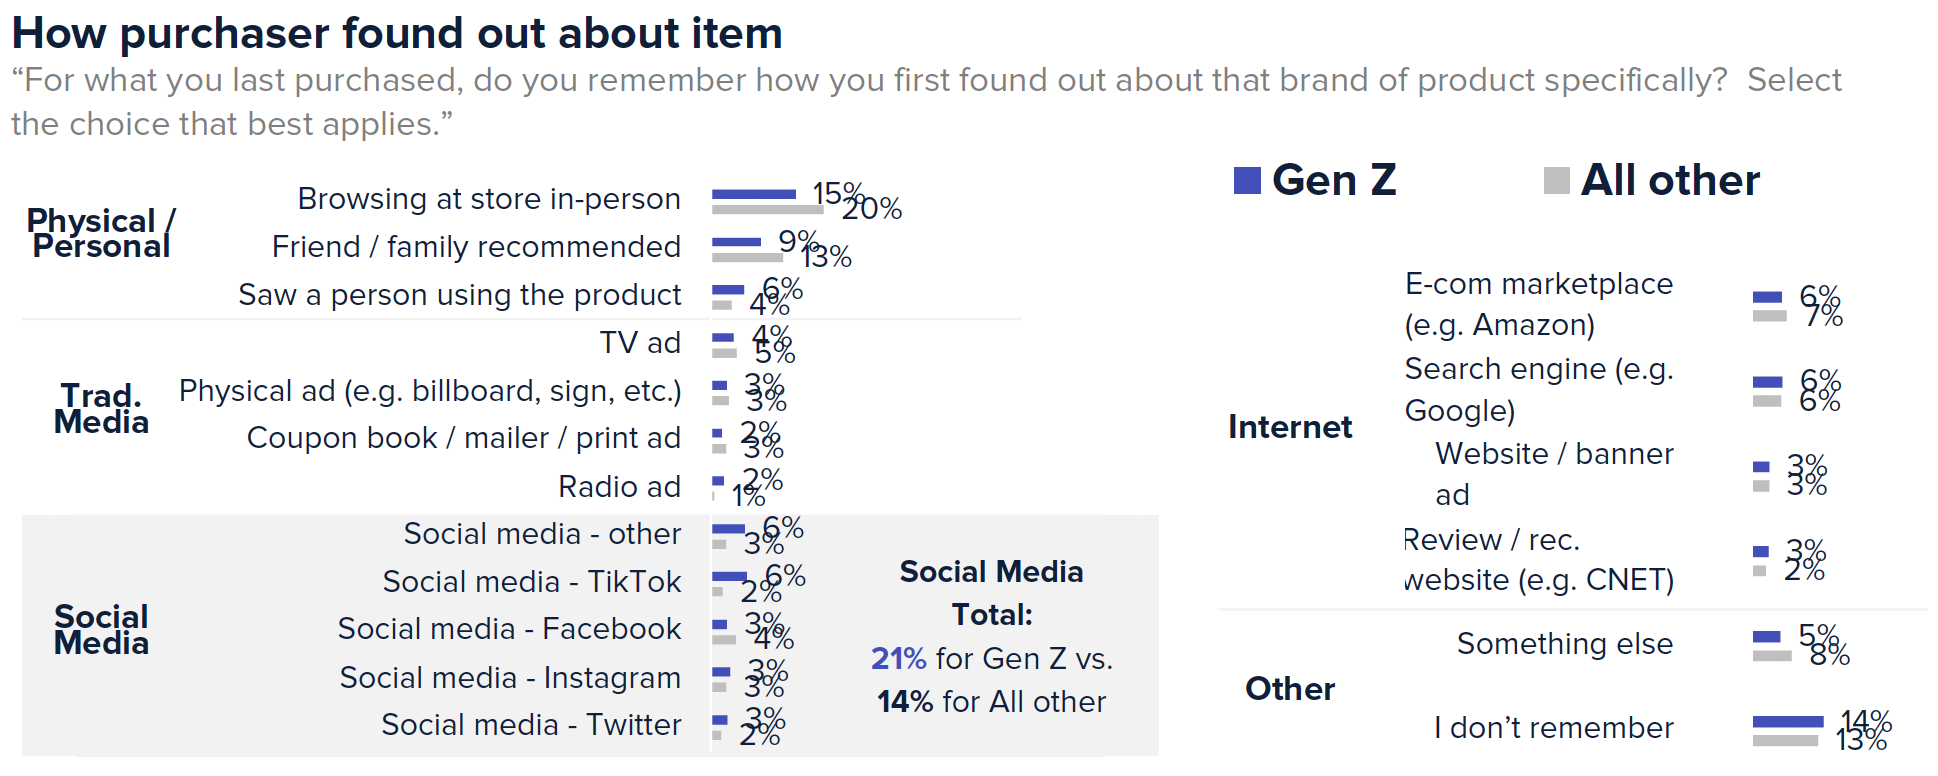 How purchaser found out about item. 21% of Gen Z found out about the item through social media, compared to 14% of other generations.